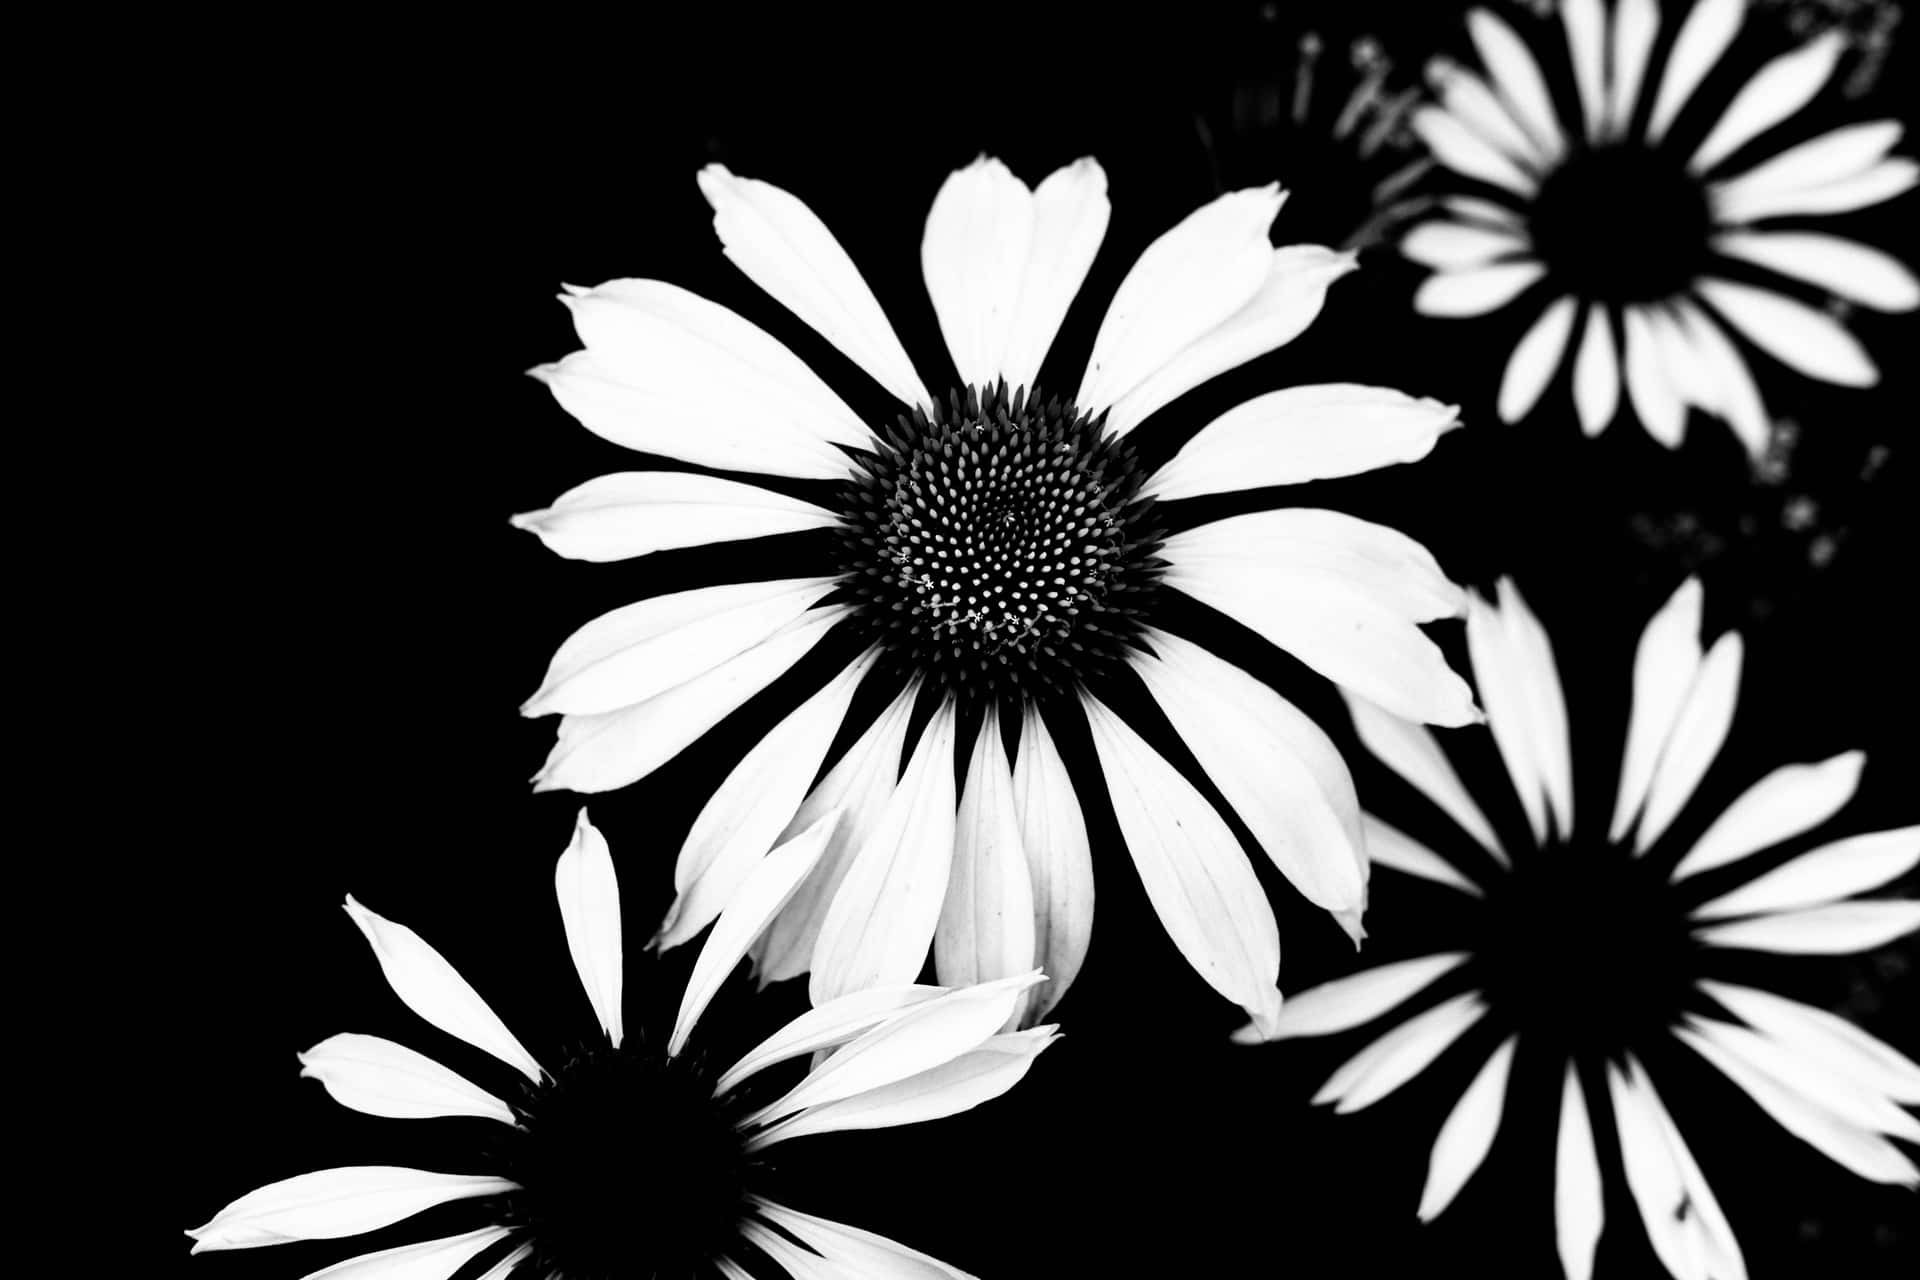 An enchanting black and white flower